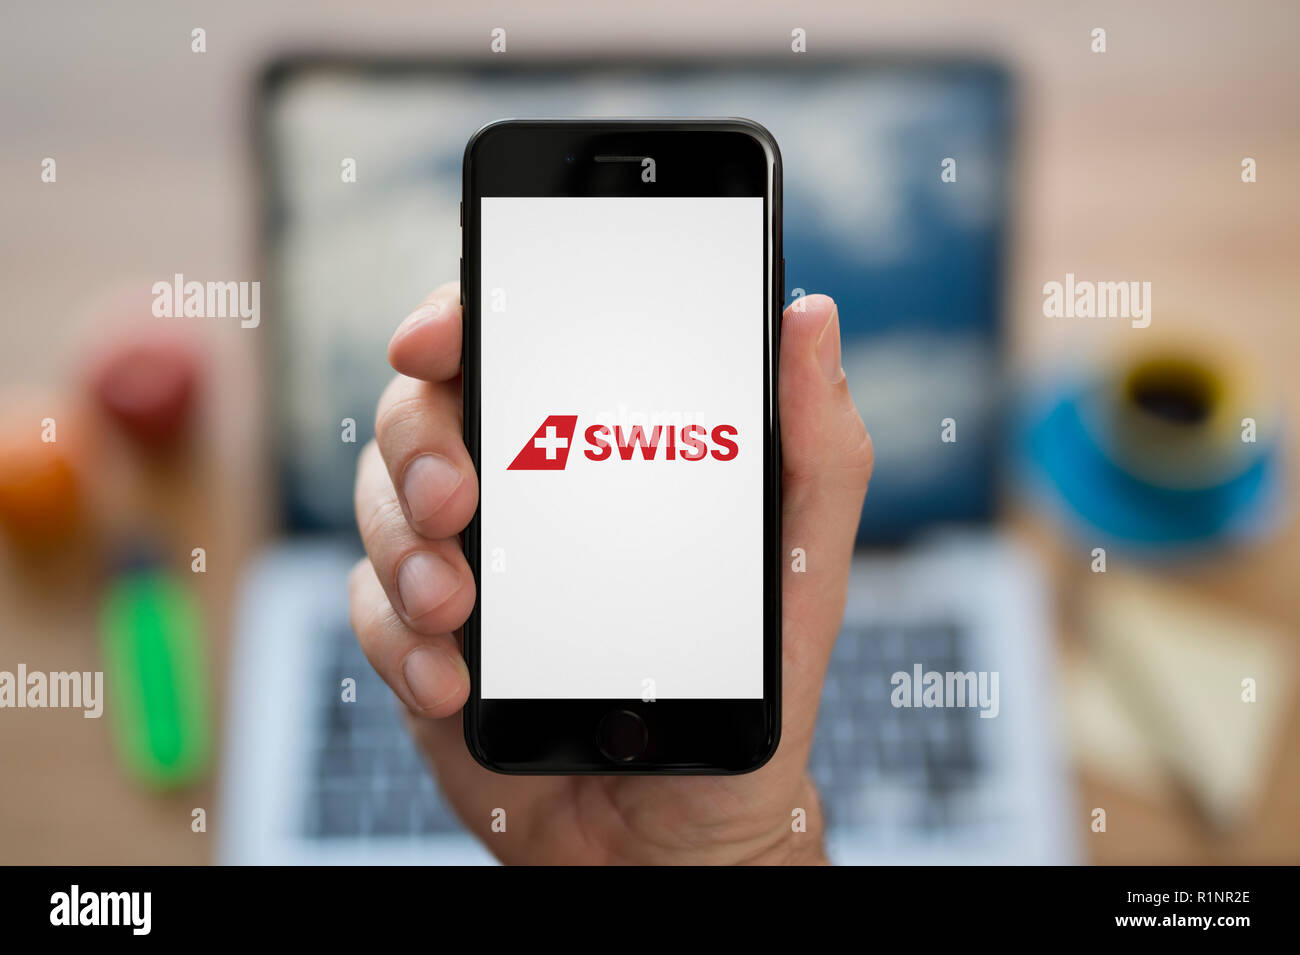 A man looks at his iPhone which displays the Swiss International Air Lines logo, while sat at his computer desk (Editorial use only). Stock Photo